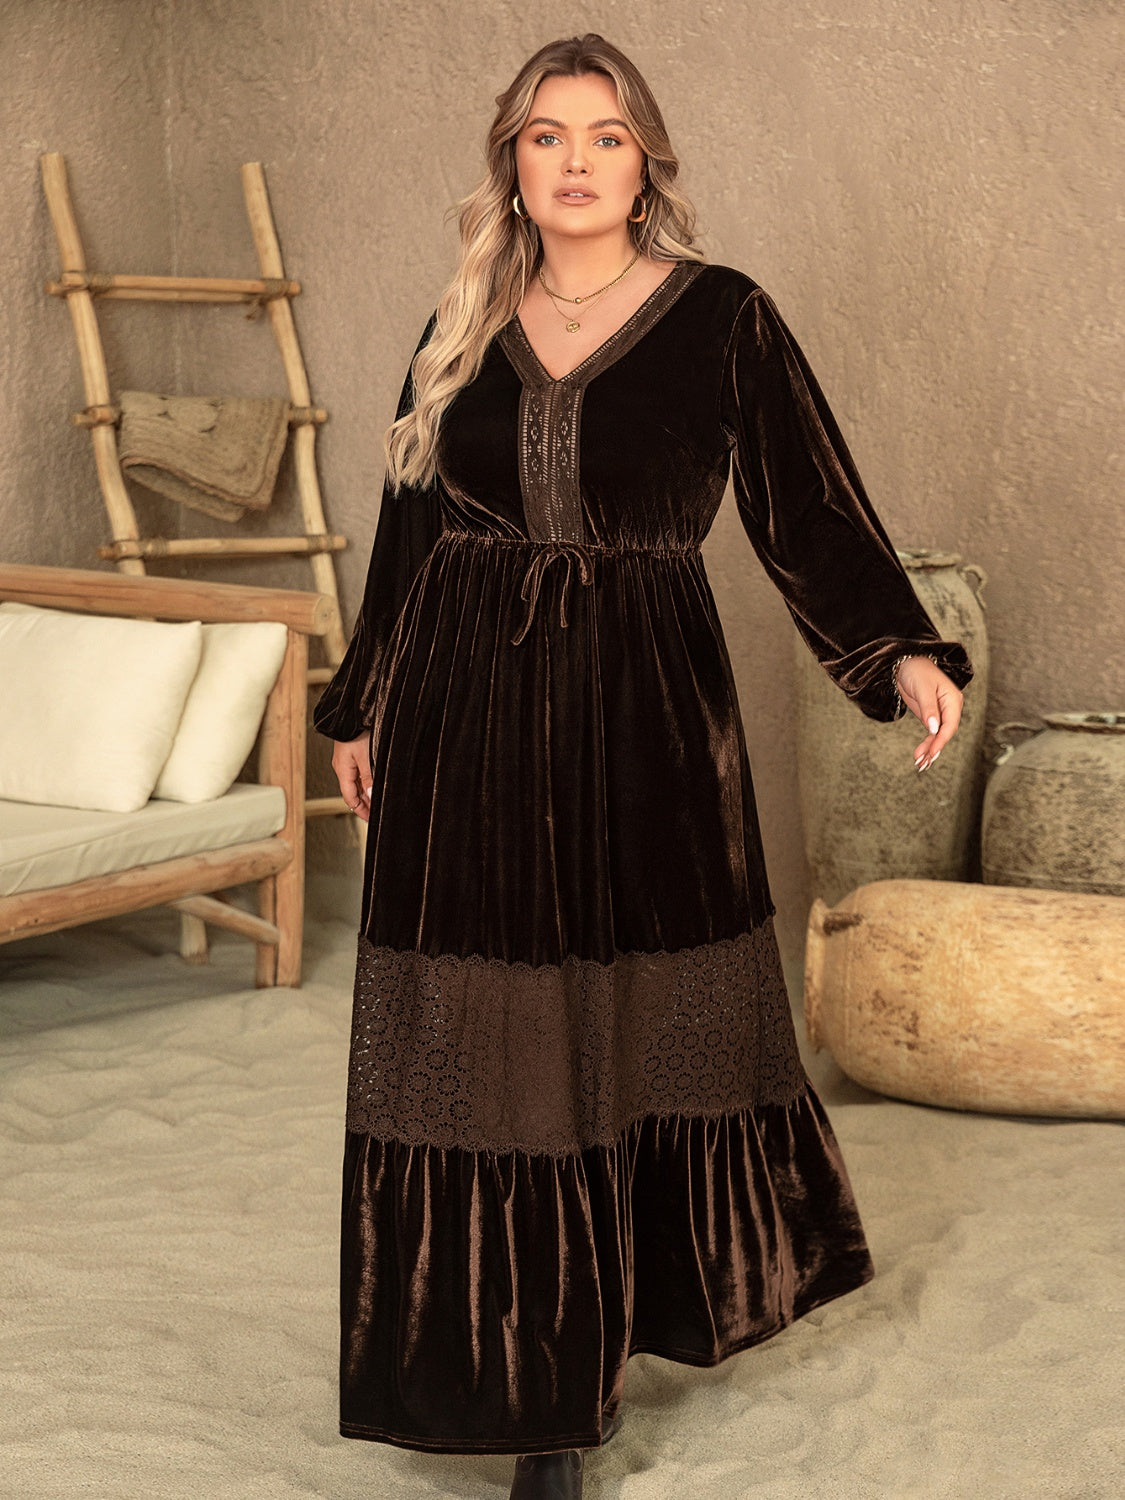 Elegant Plus Size V-Neck Maxi Dress with Balloon Sleeves for Women Over 50 - Perfect for Summer Beach Wedding Guest Attire